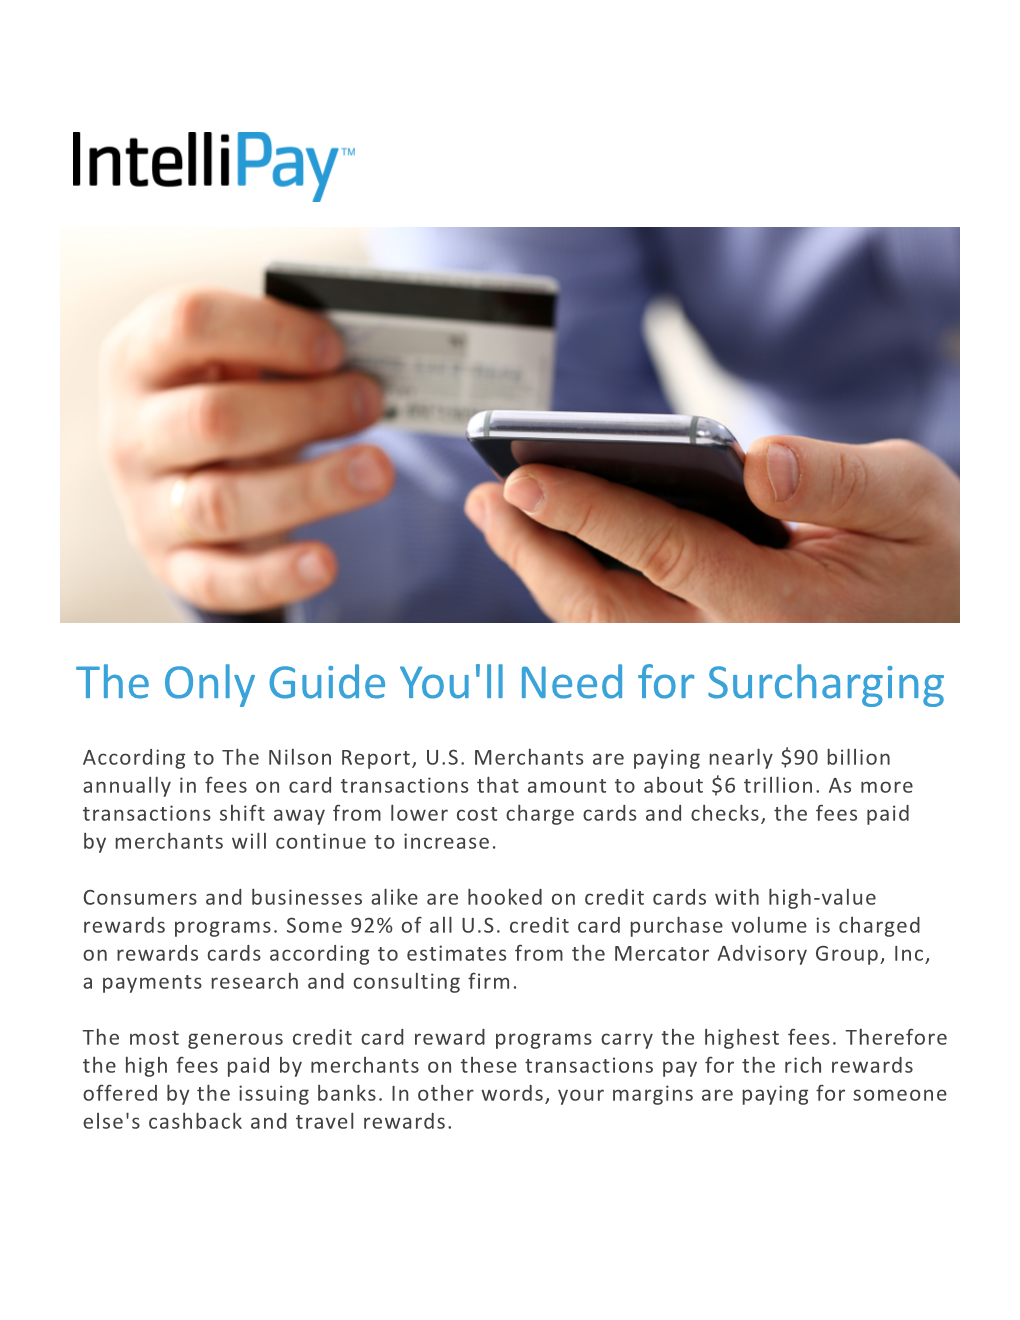 The Only Guide to Surcharging You'll Need